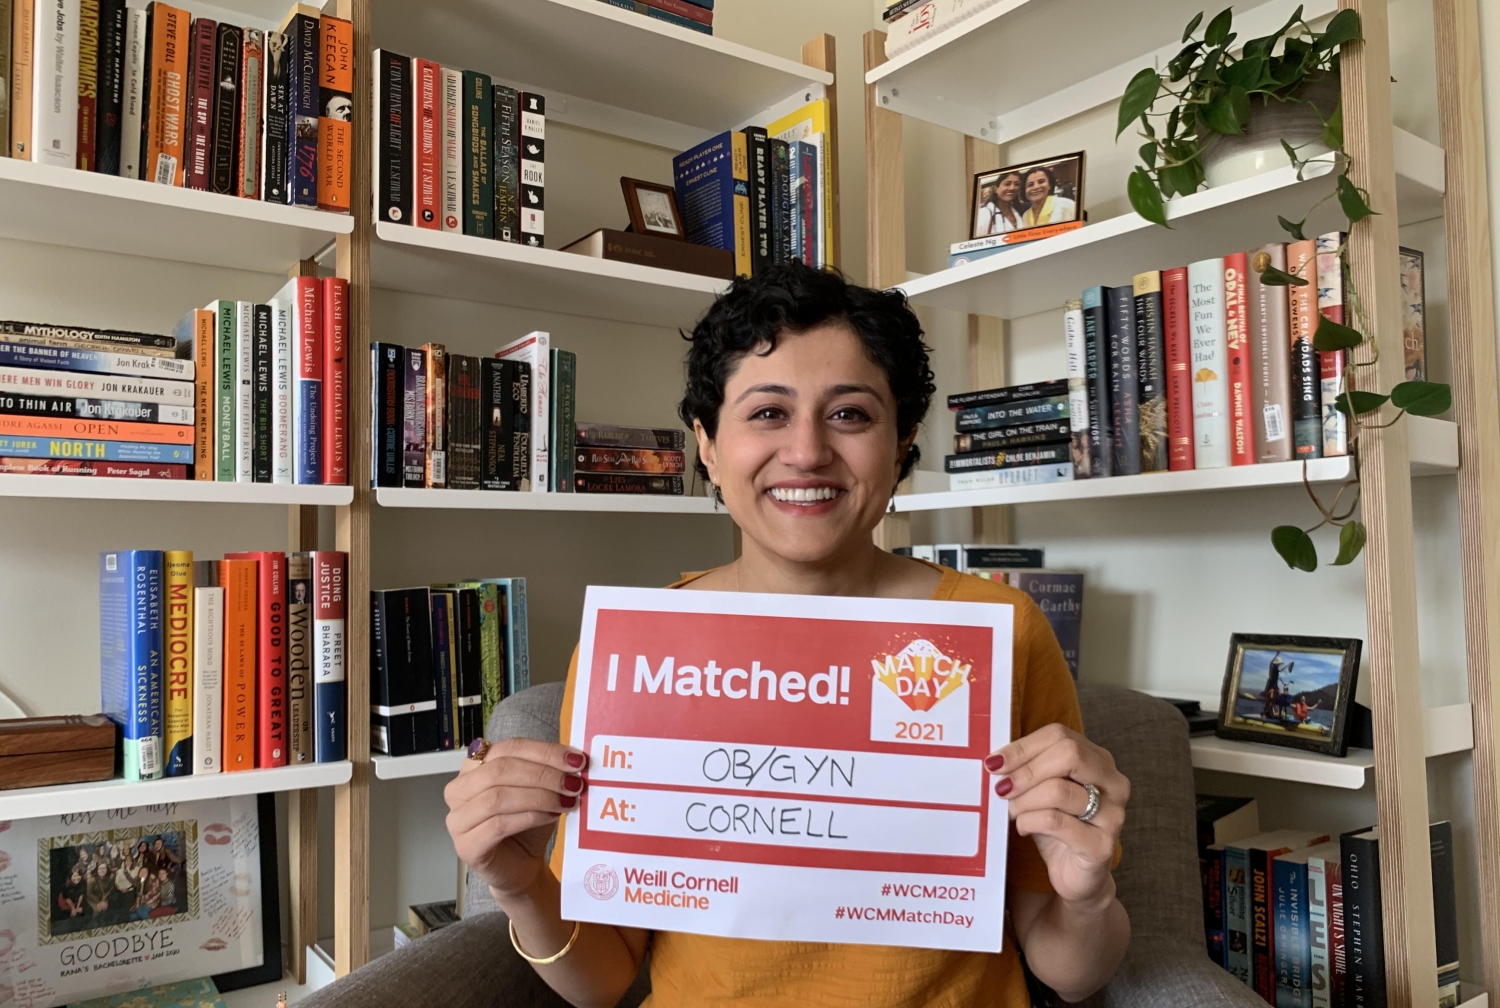 a woman smiling for a photo, holding a sign showing where she matched for Match Day 2021